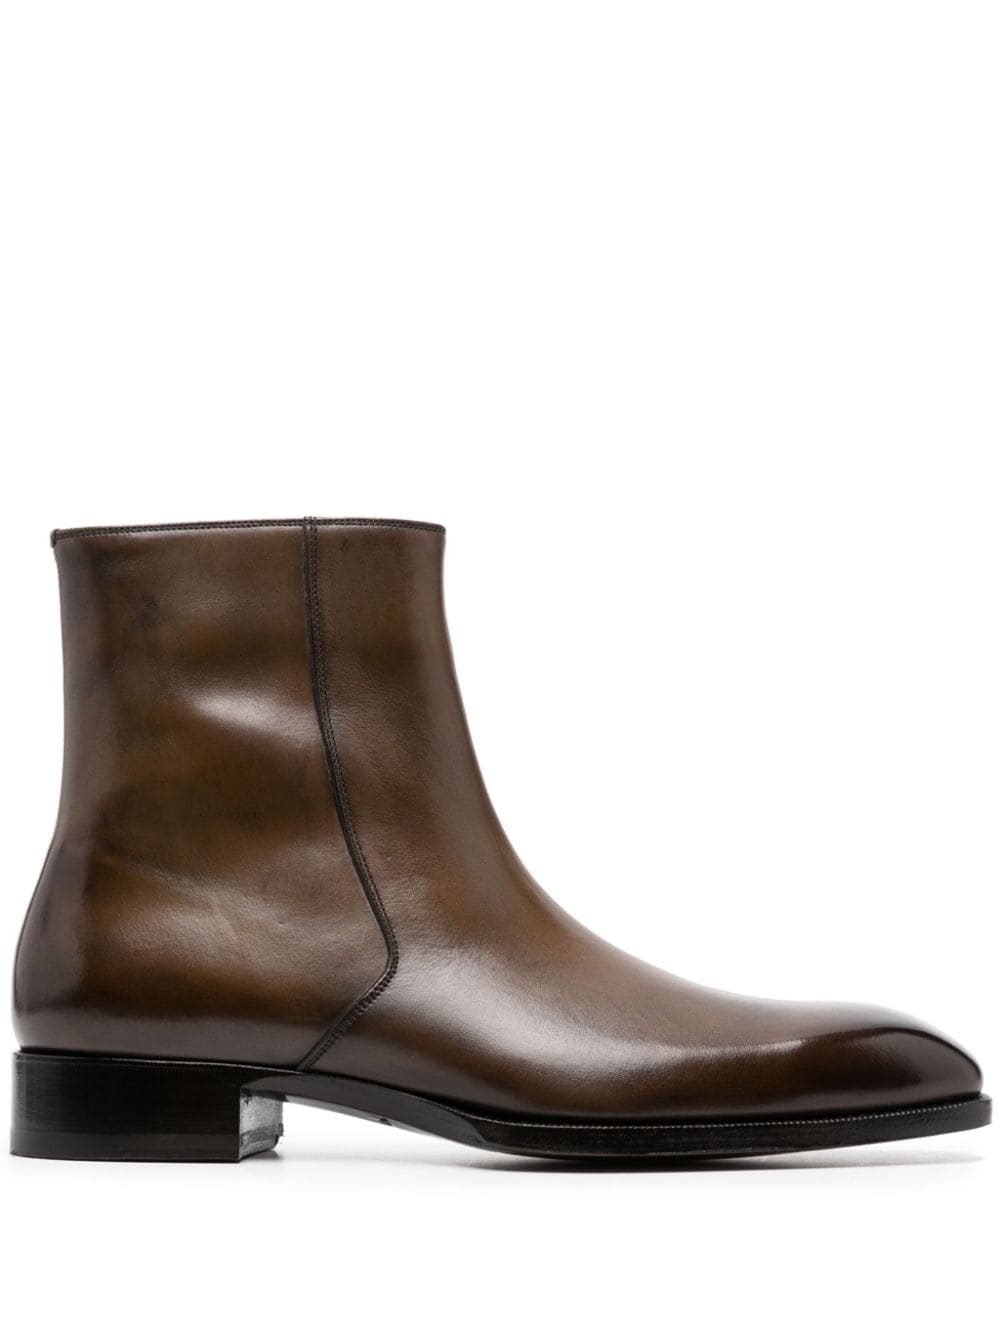 TOM FORD polished leather ankle boots - Brown von TOM FORD